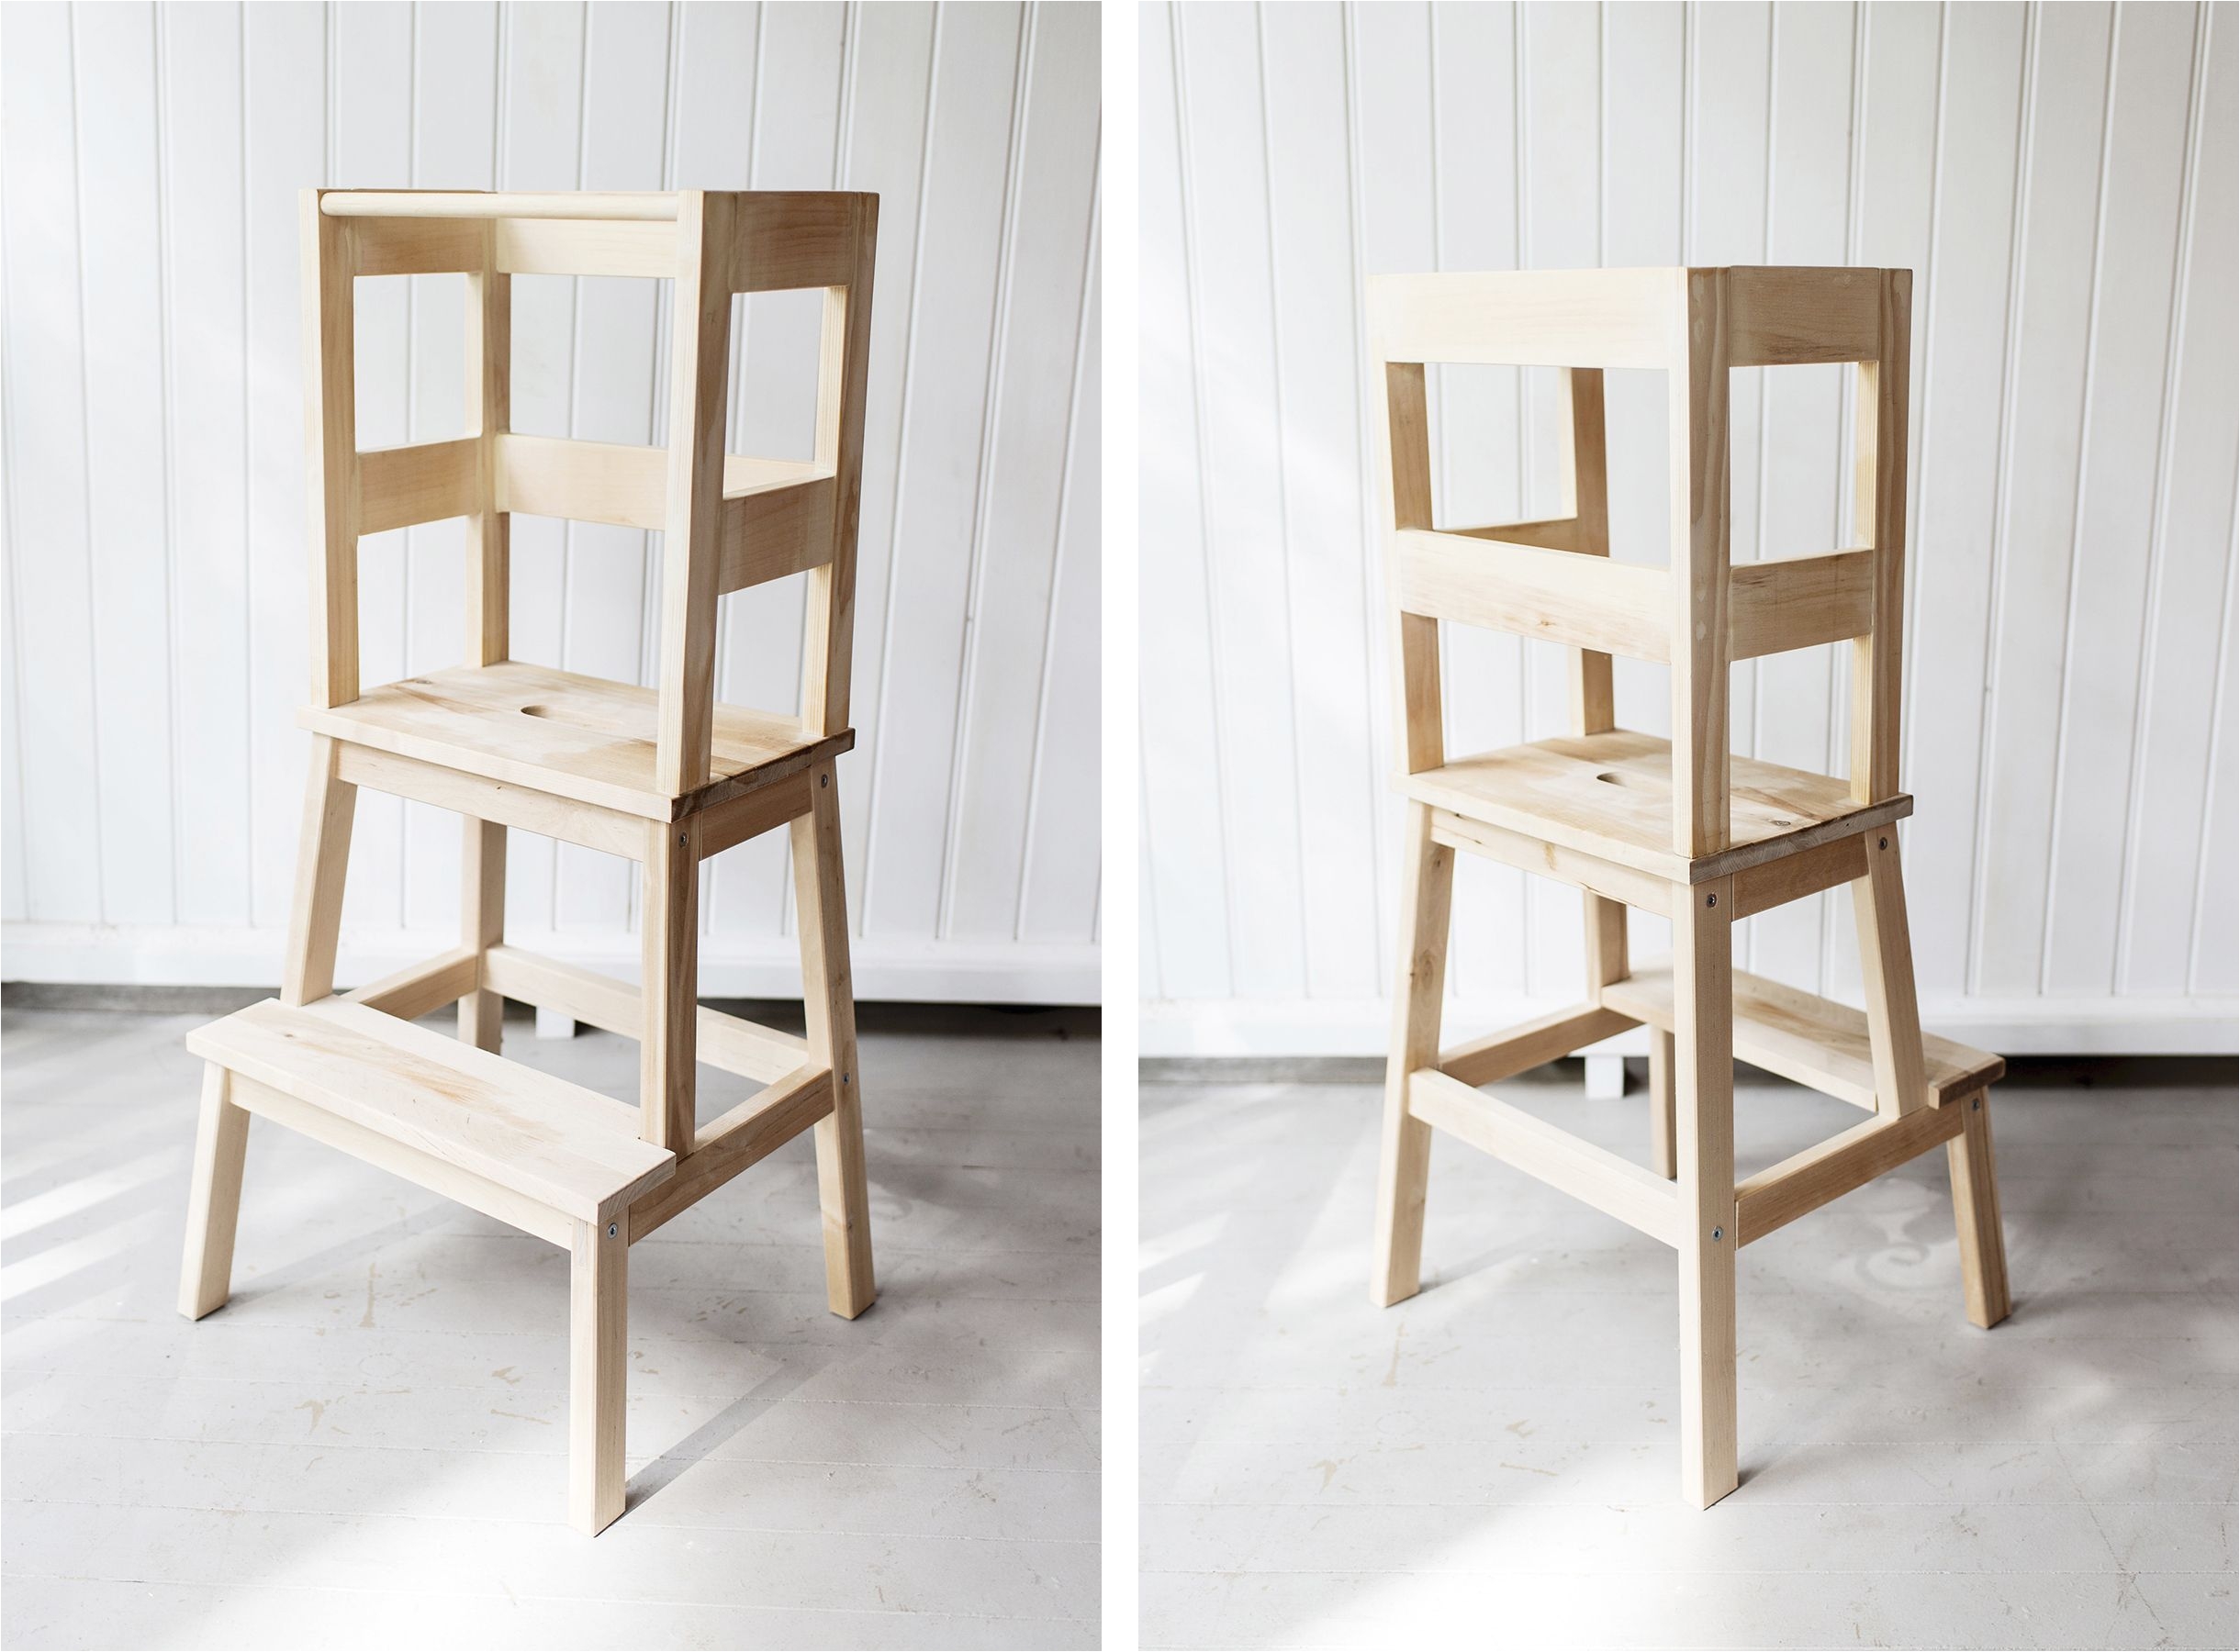 Old Ikea Wooden High Chair Ikea Hack toddler Learning tower Using A Bekvam Stool Tutorial